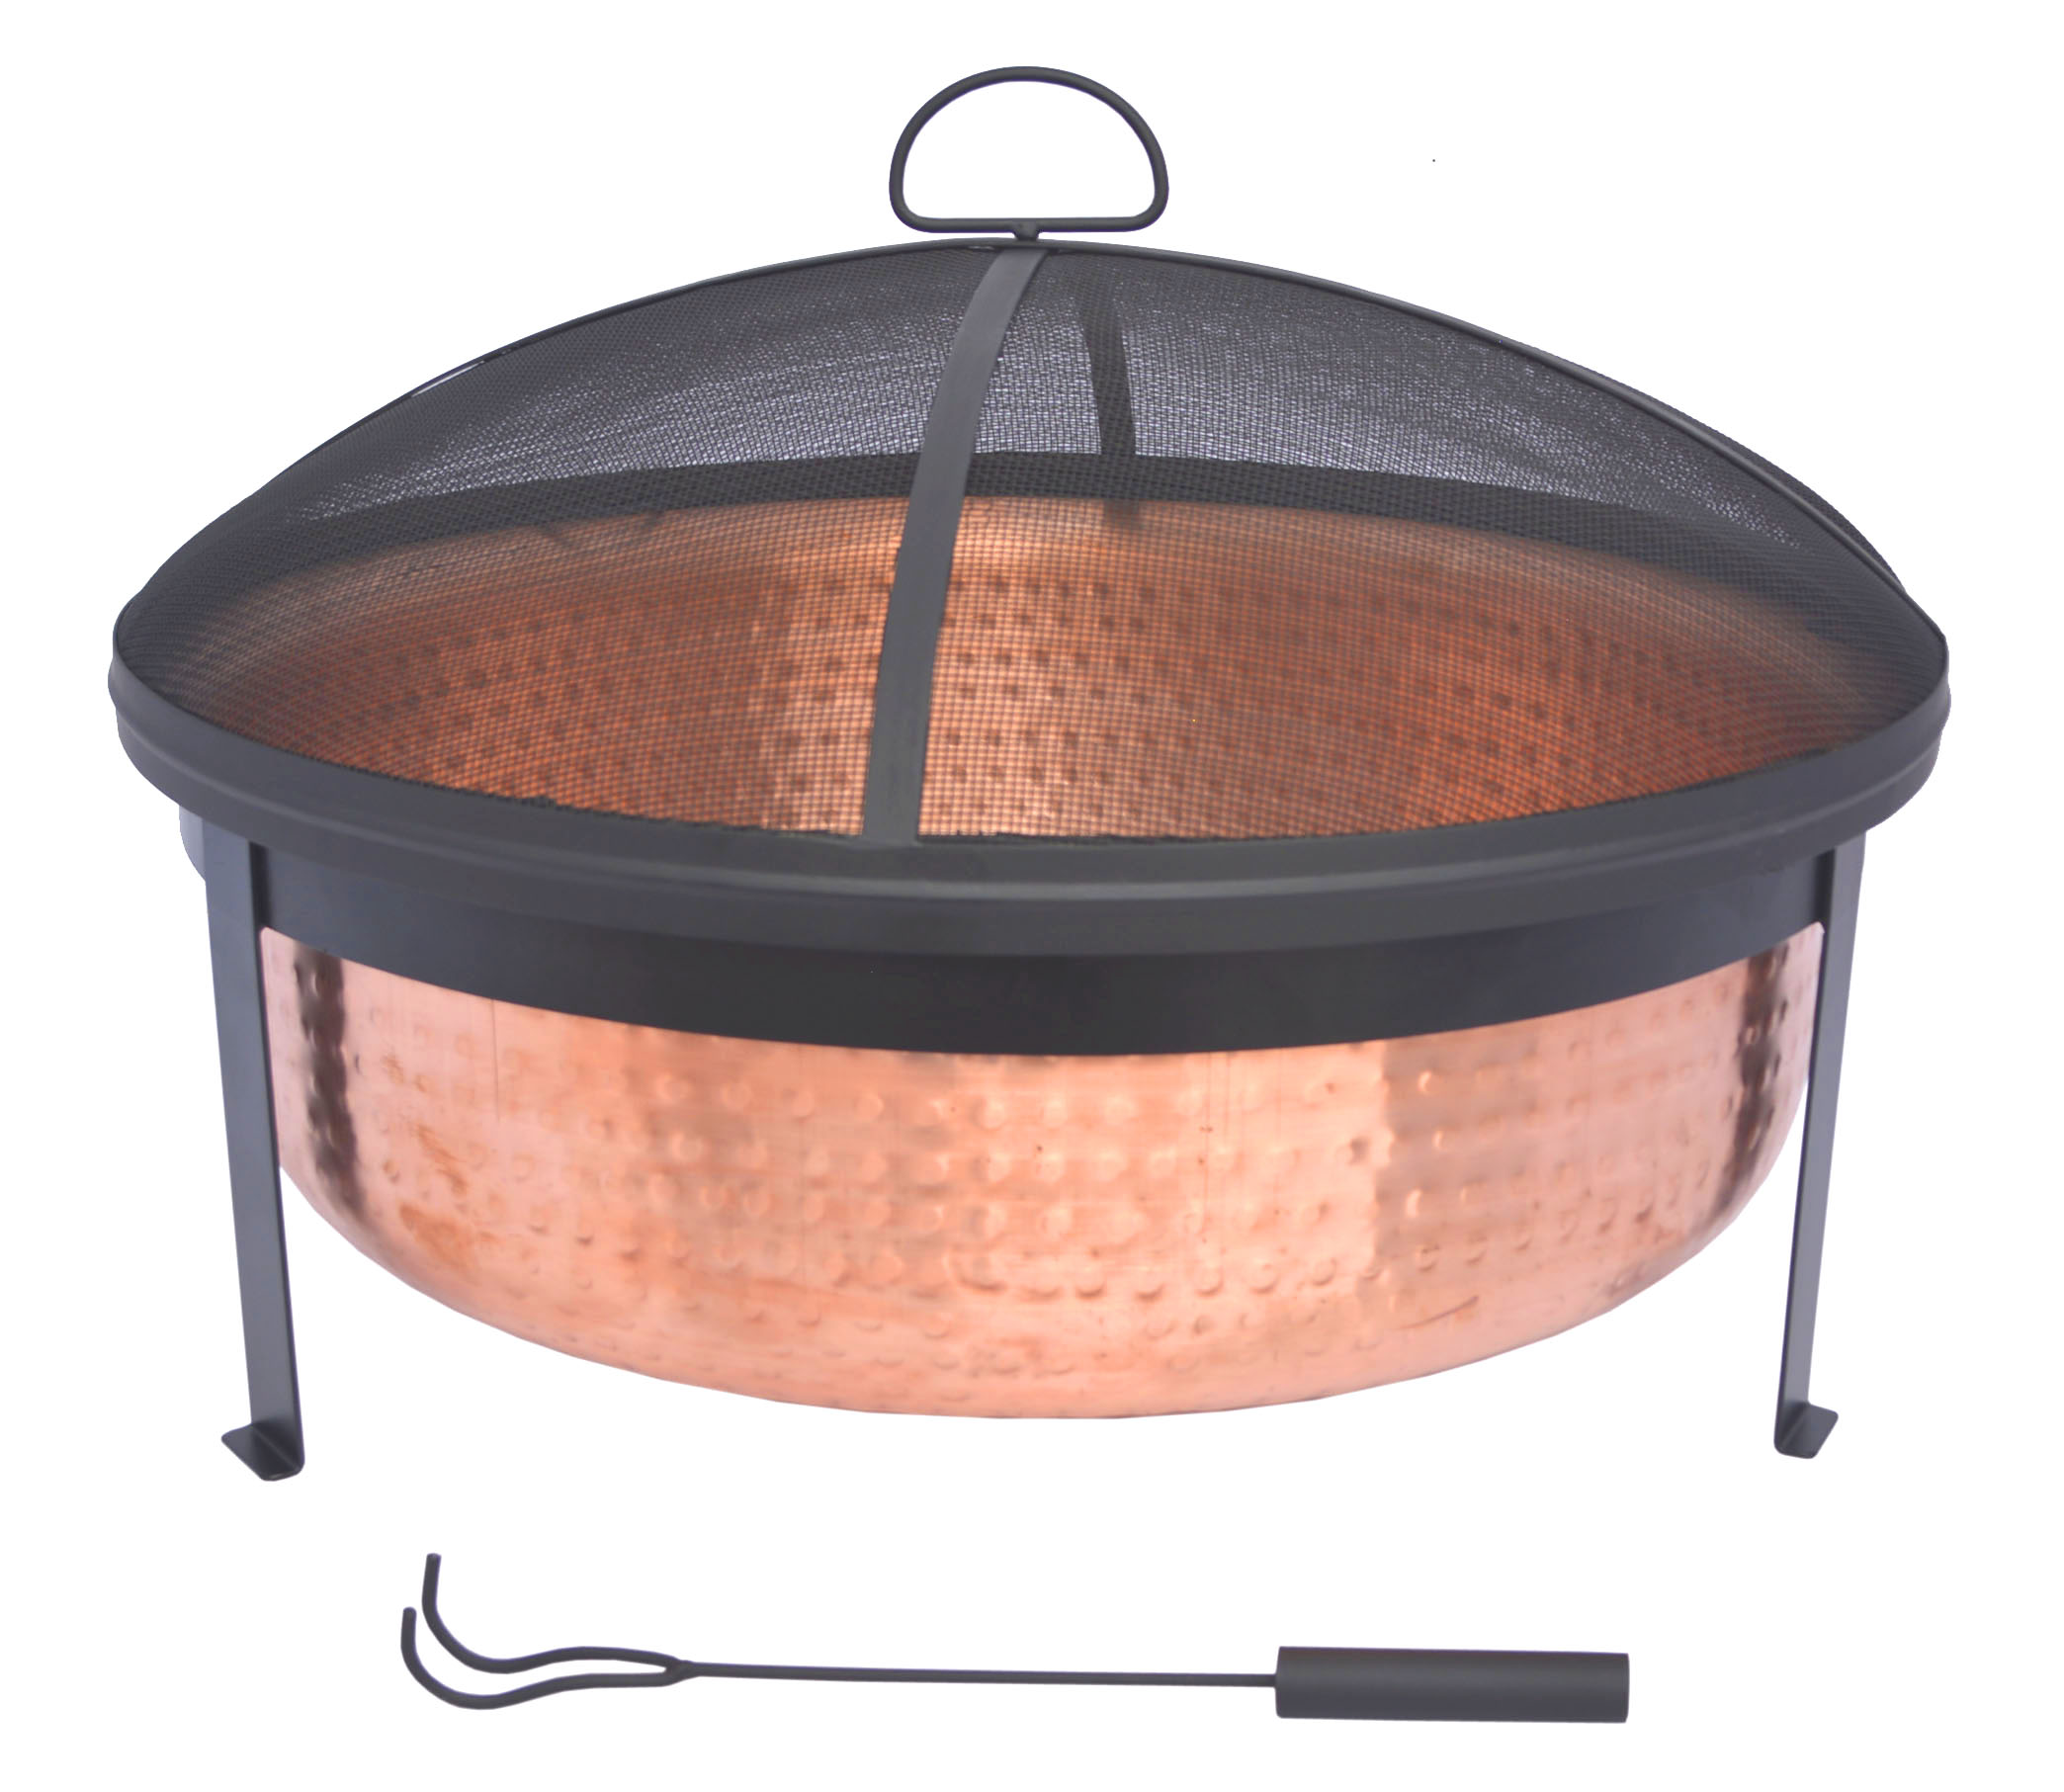 Better Homes & Gardens Wood Burning Copper Fire Pit, 30-inch diameter and 22-inch Height - image 4 of 9